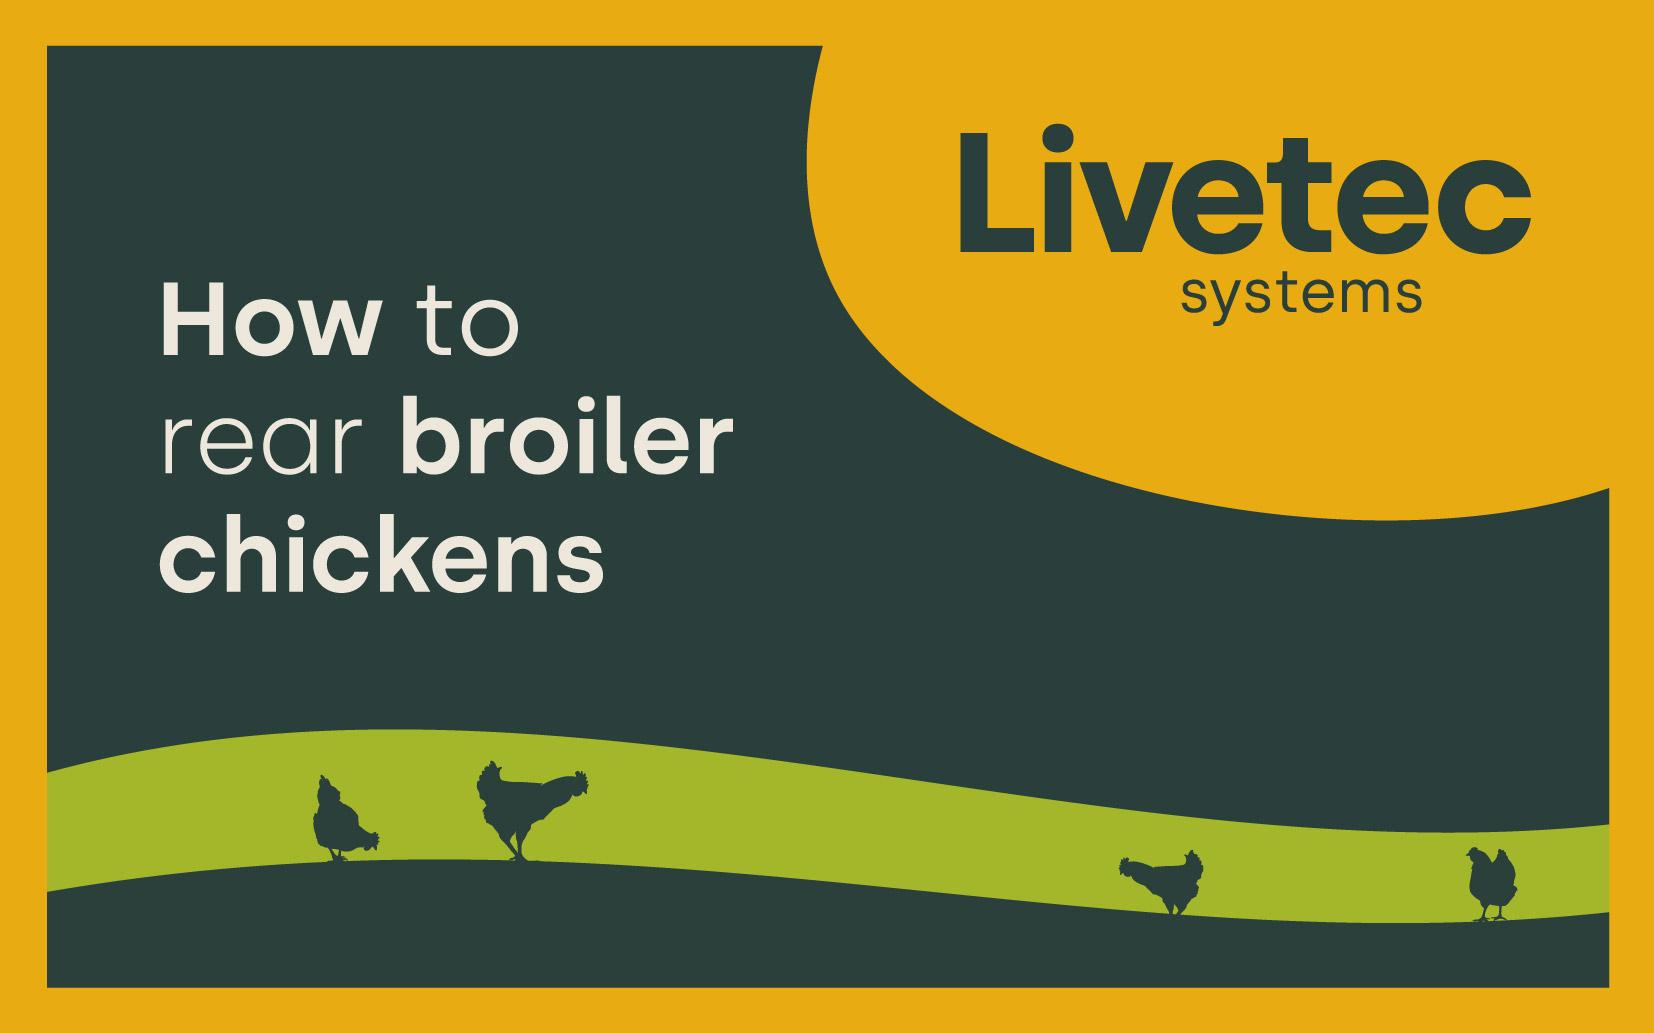 How to rear broiler chickens